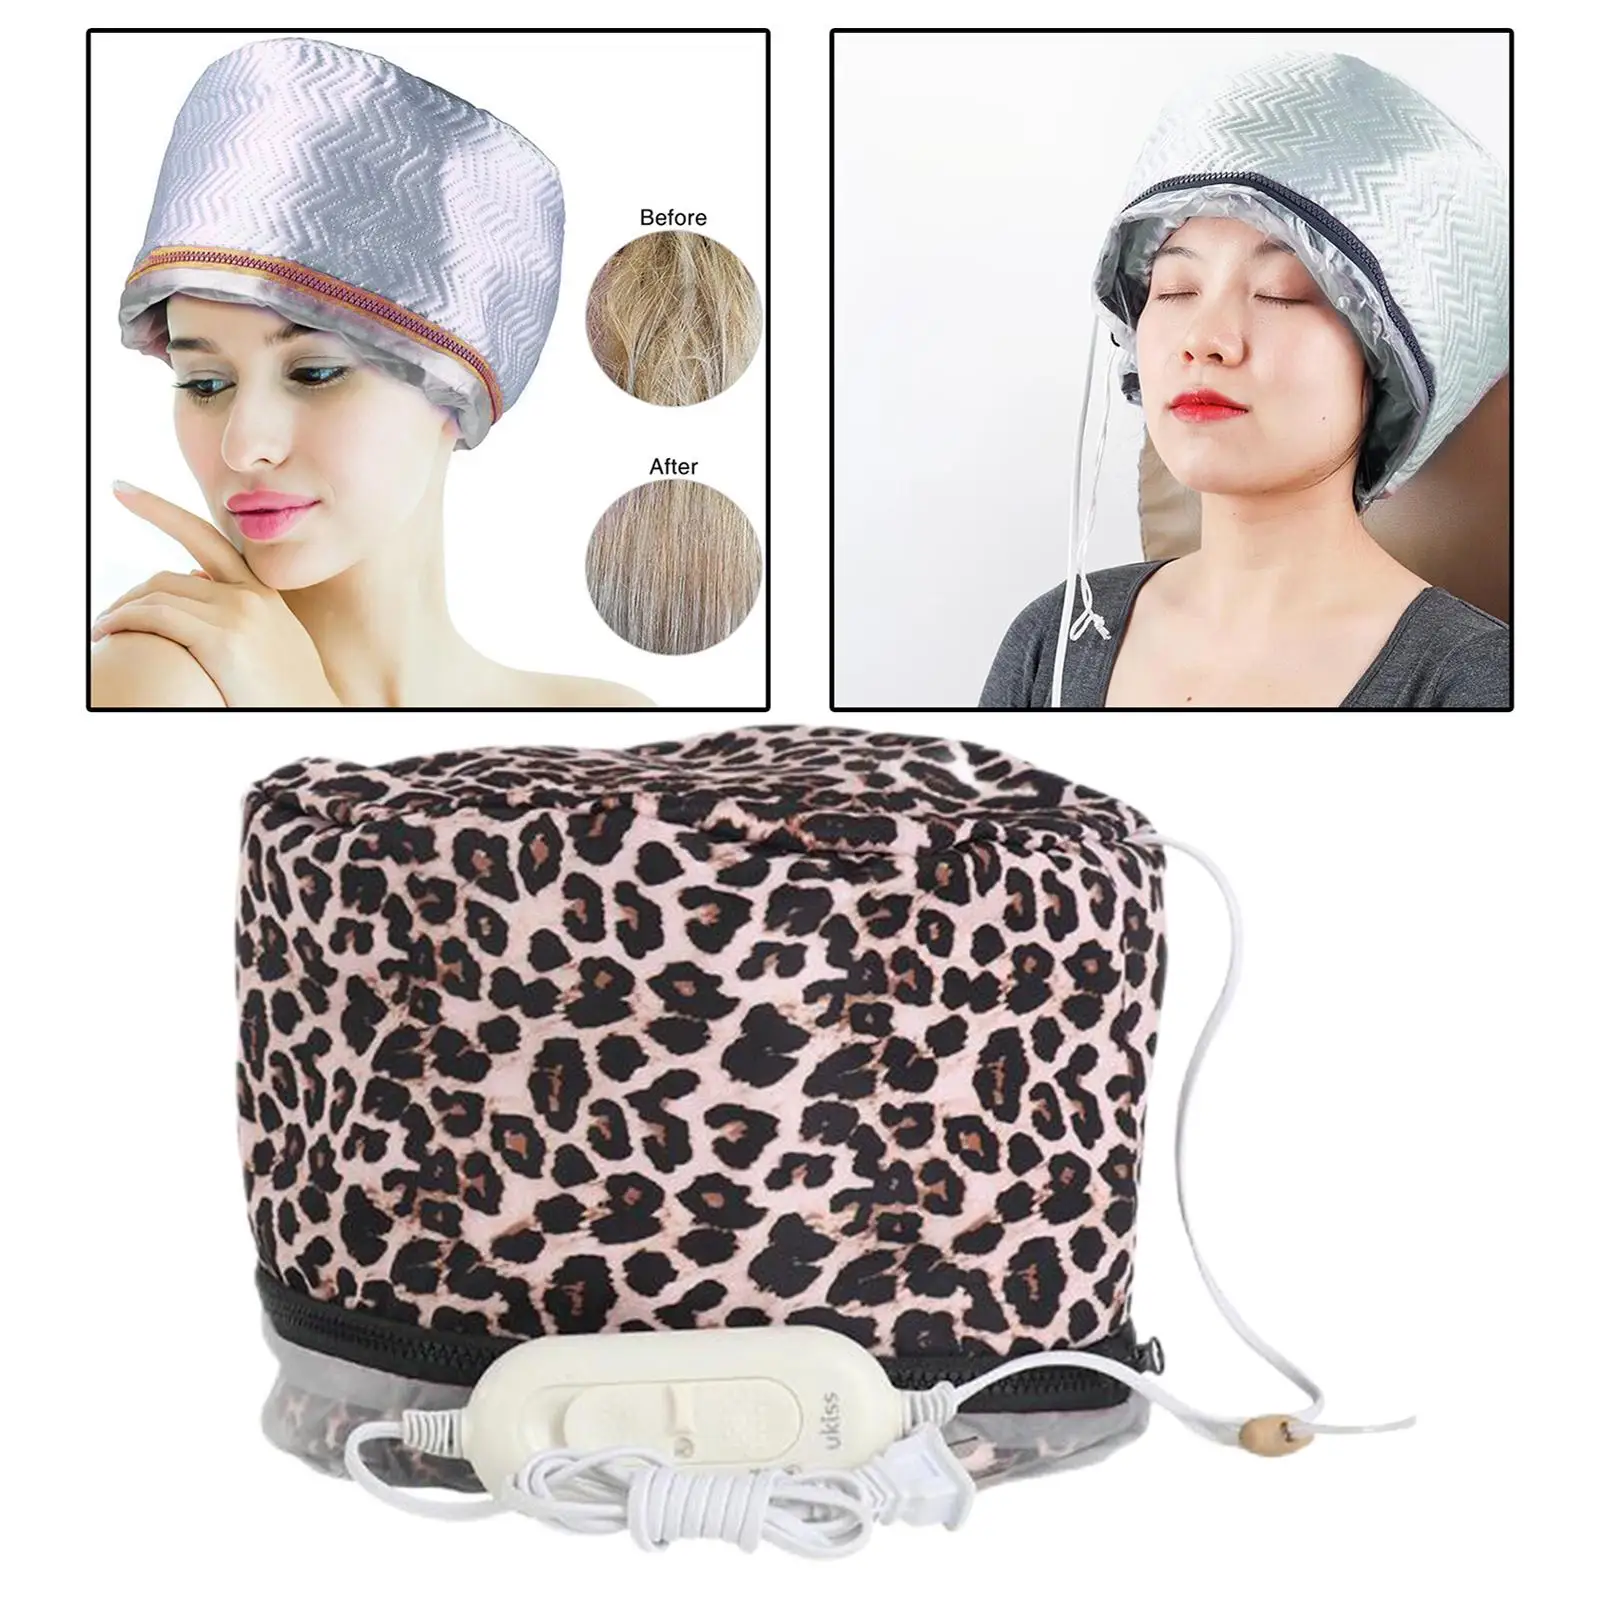 Hair Steamer Heating Hat Thermal Caps Family Personal Care 3 Level Temperature Control US